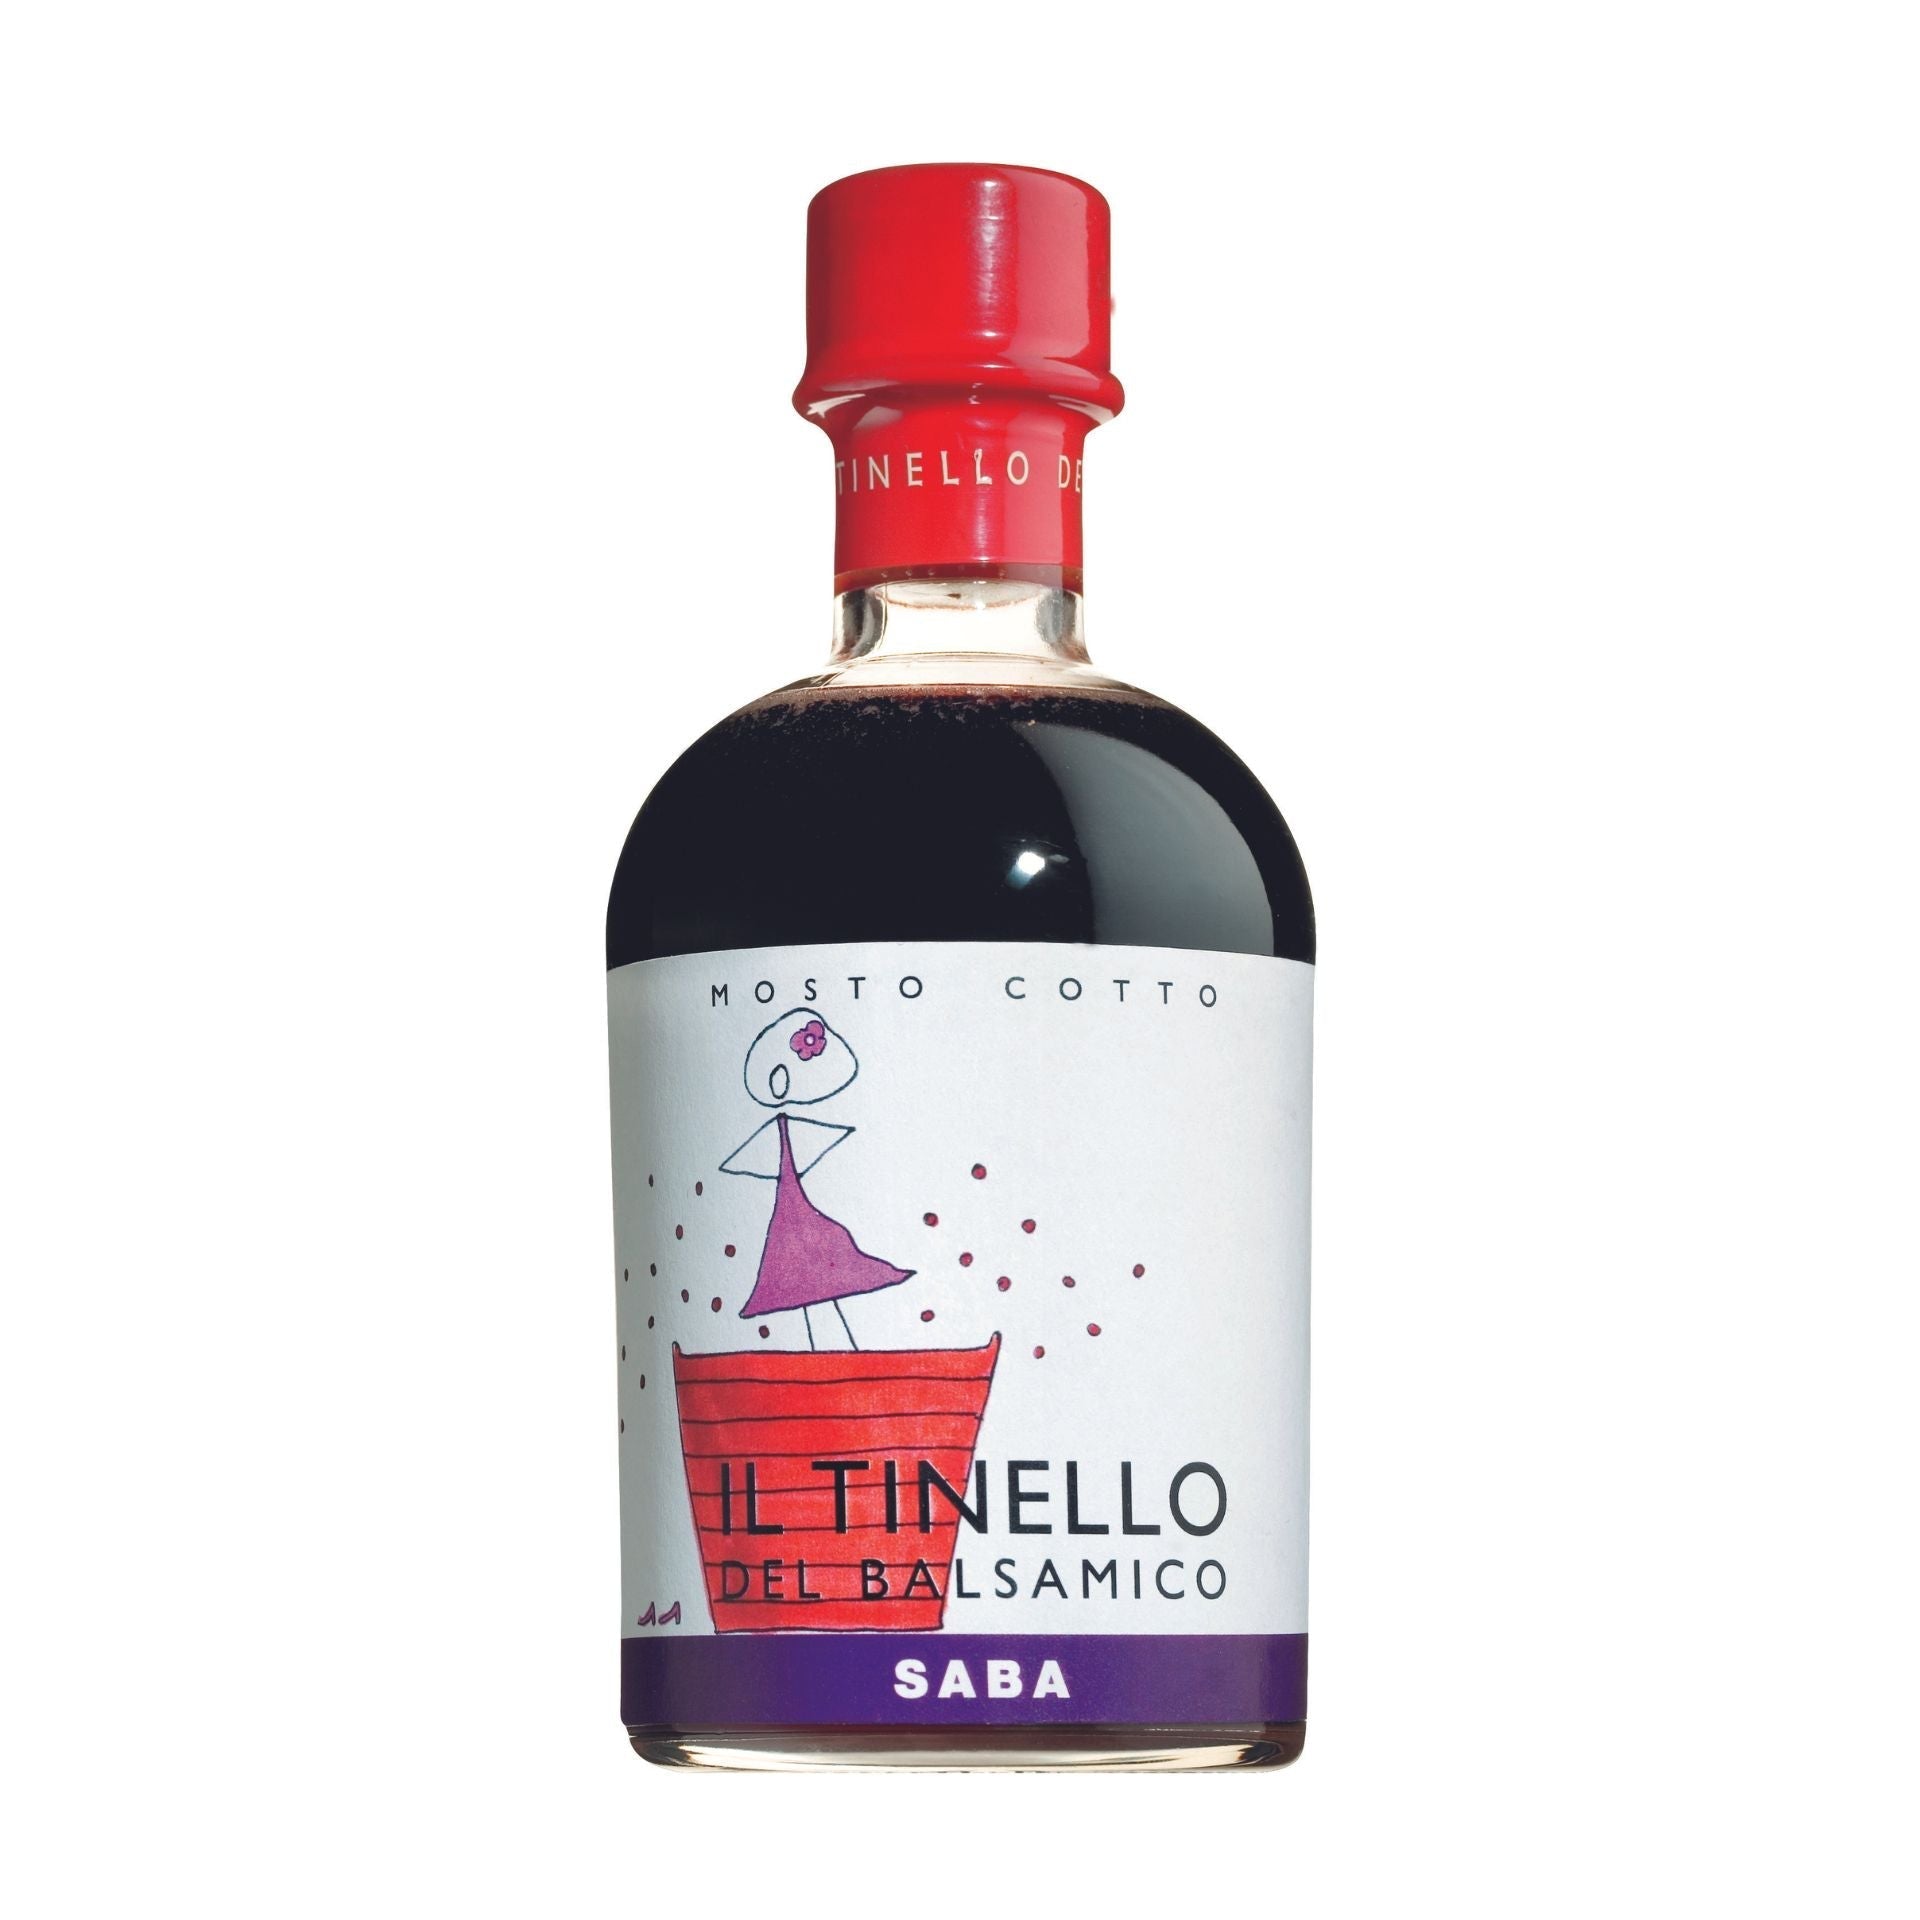 Il Borgo del Balsamico Il Tinello Saba Grapes Cooked Must Condiment 250ml  | Imported and distributed in the UK by Just Gourmet Foods